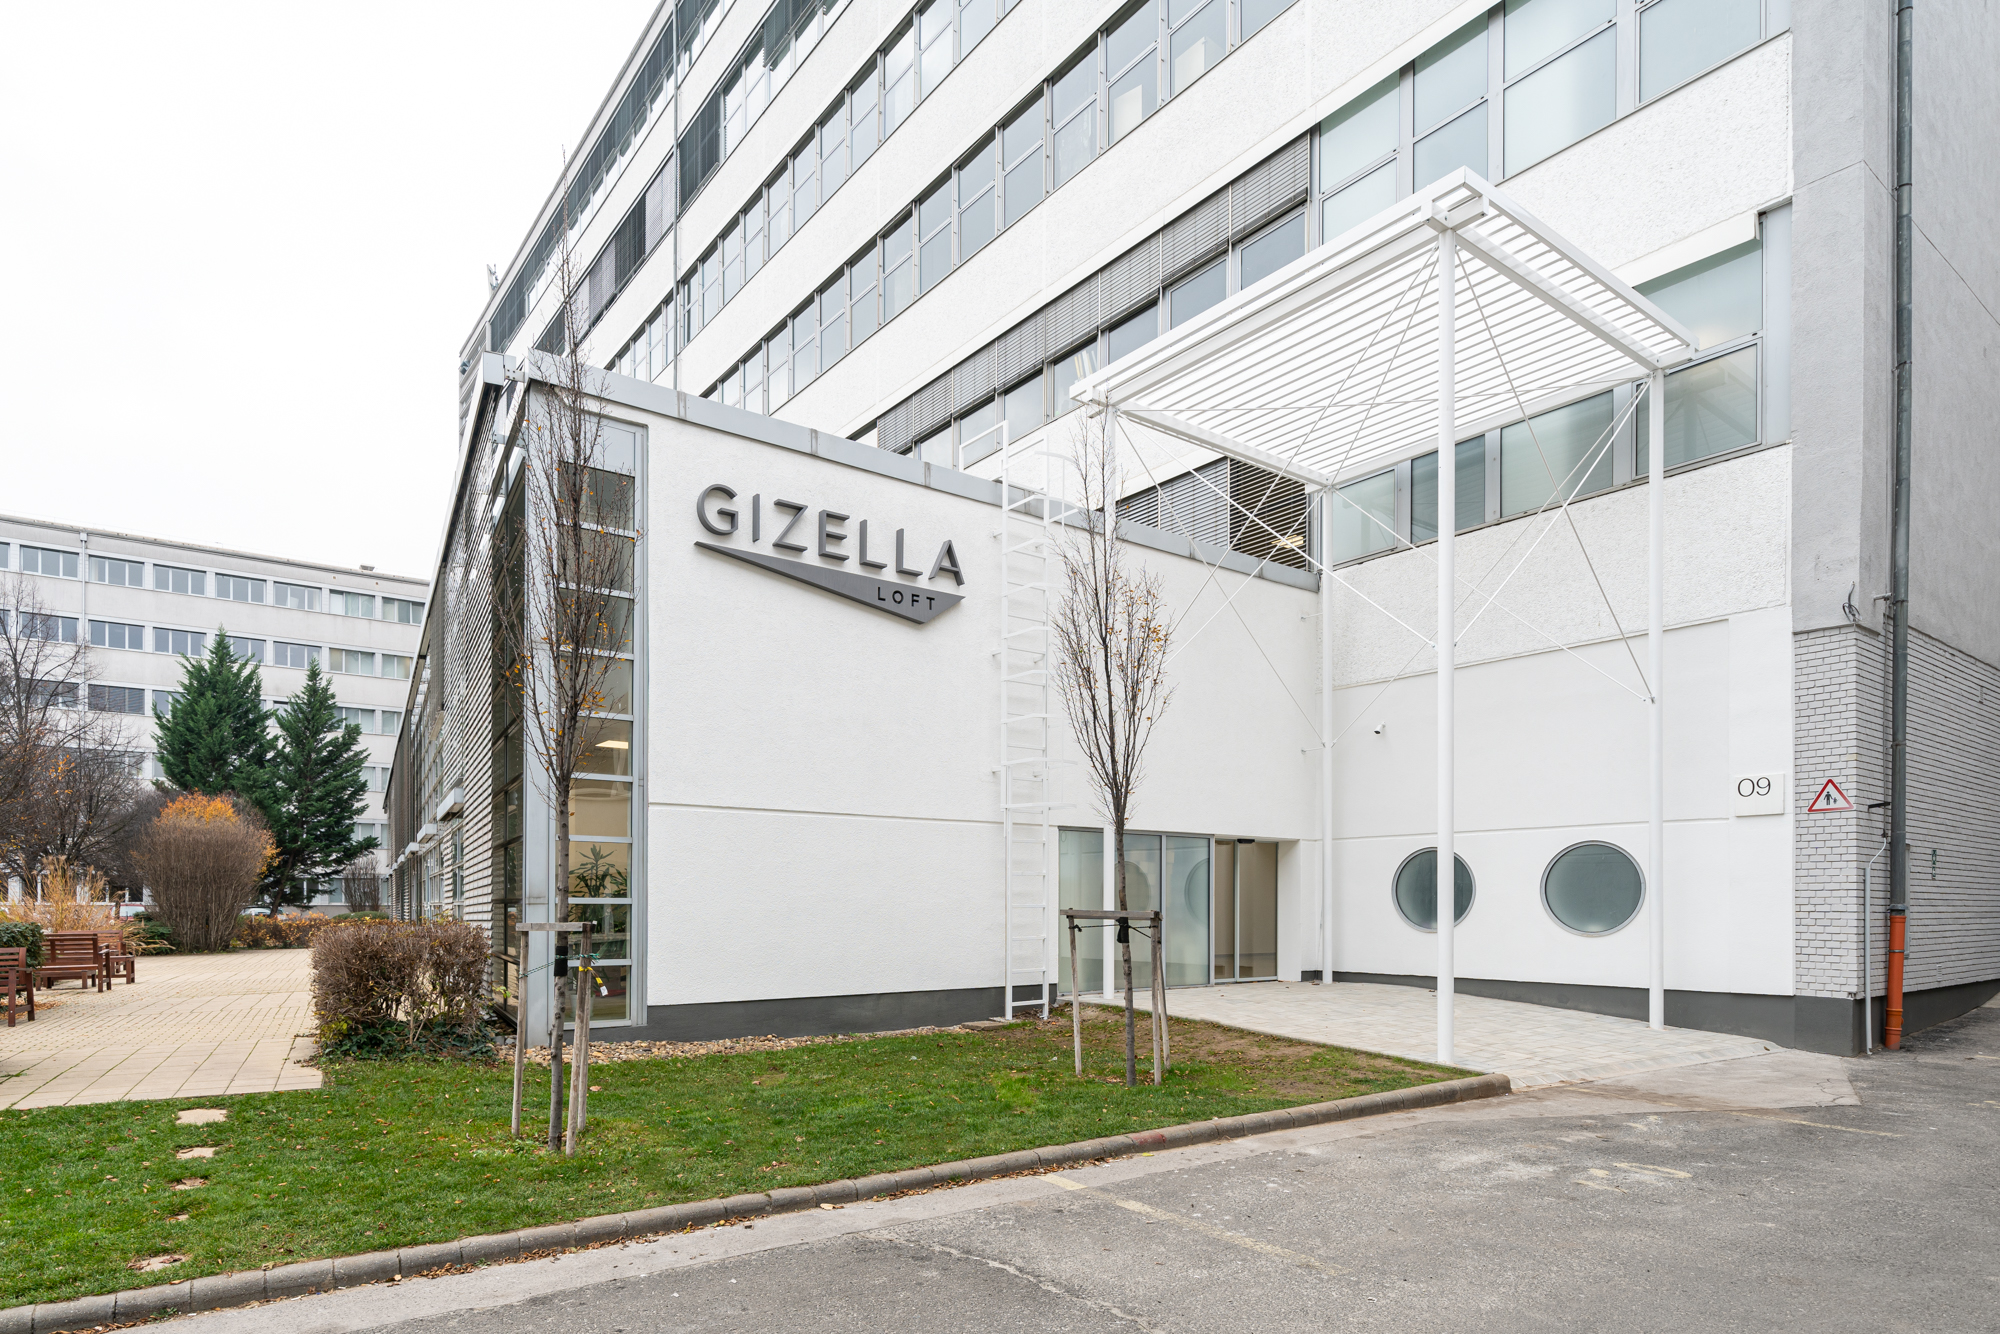 Gizella Loft office building to welcome new international tenant